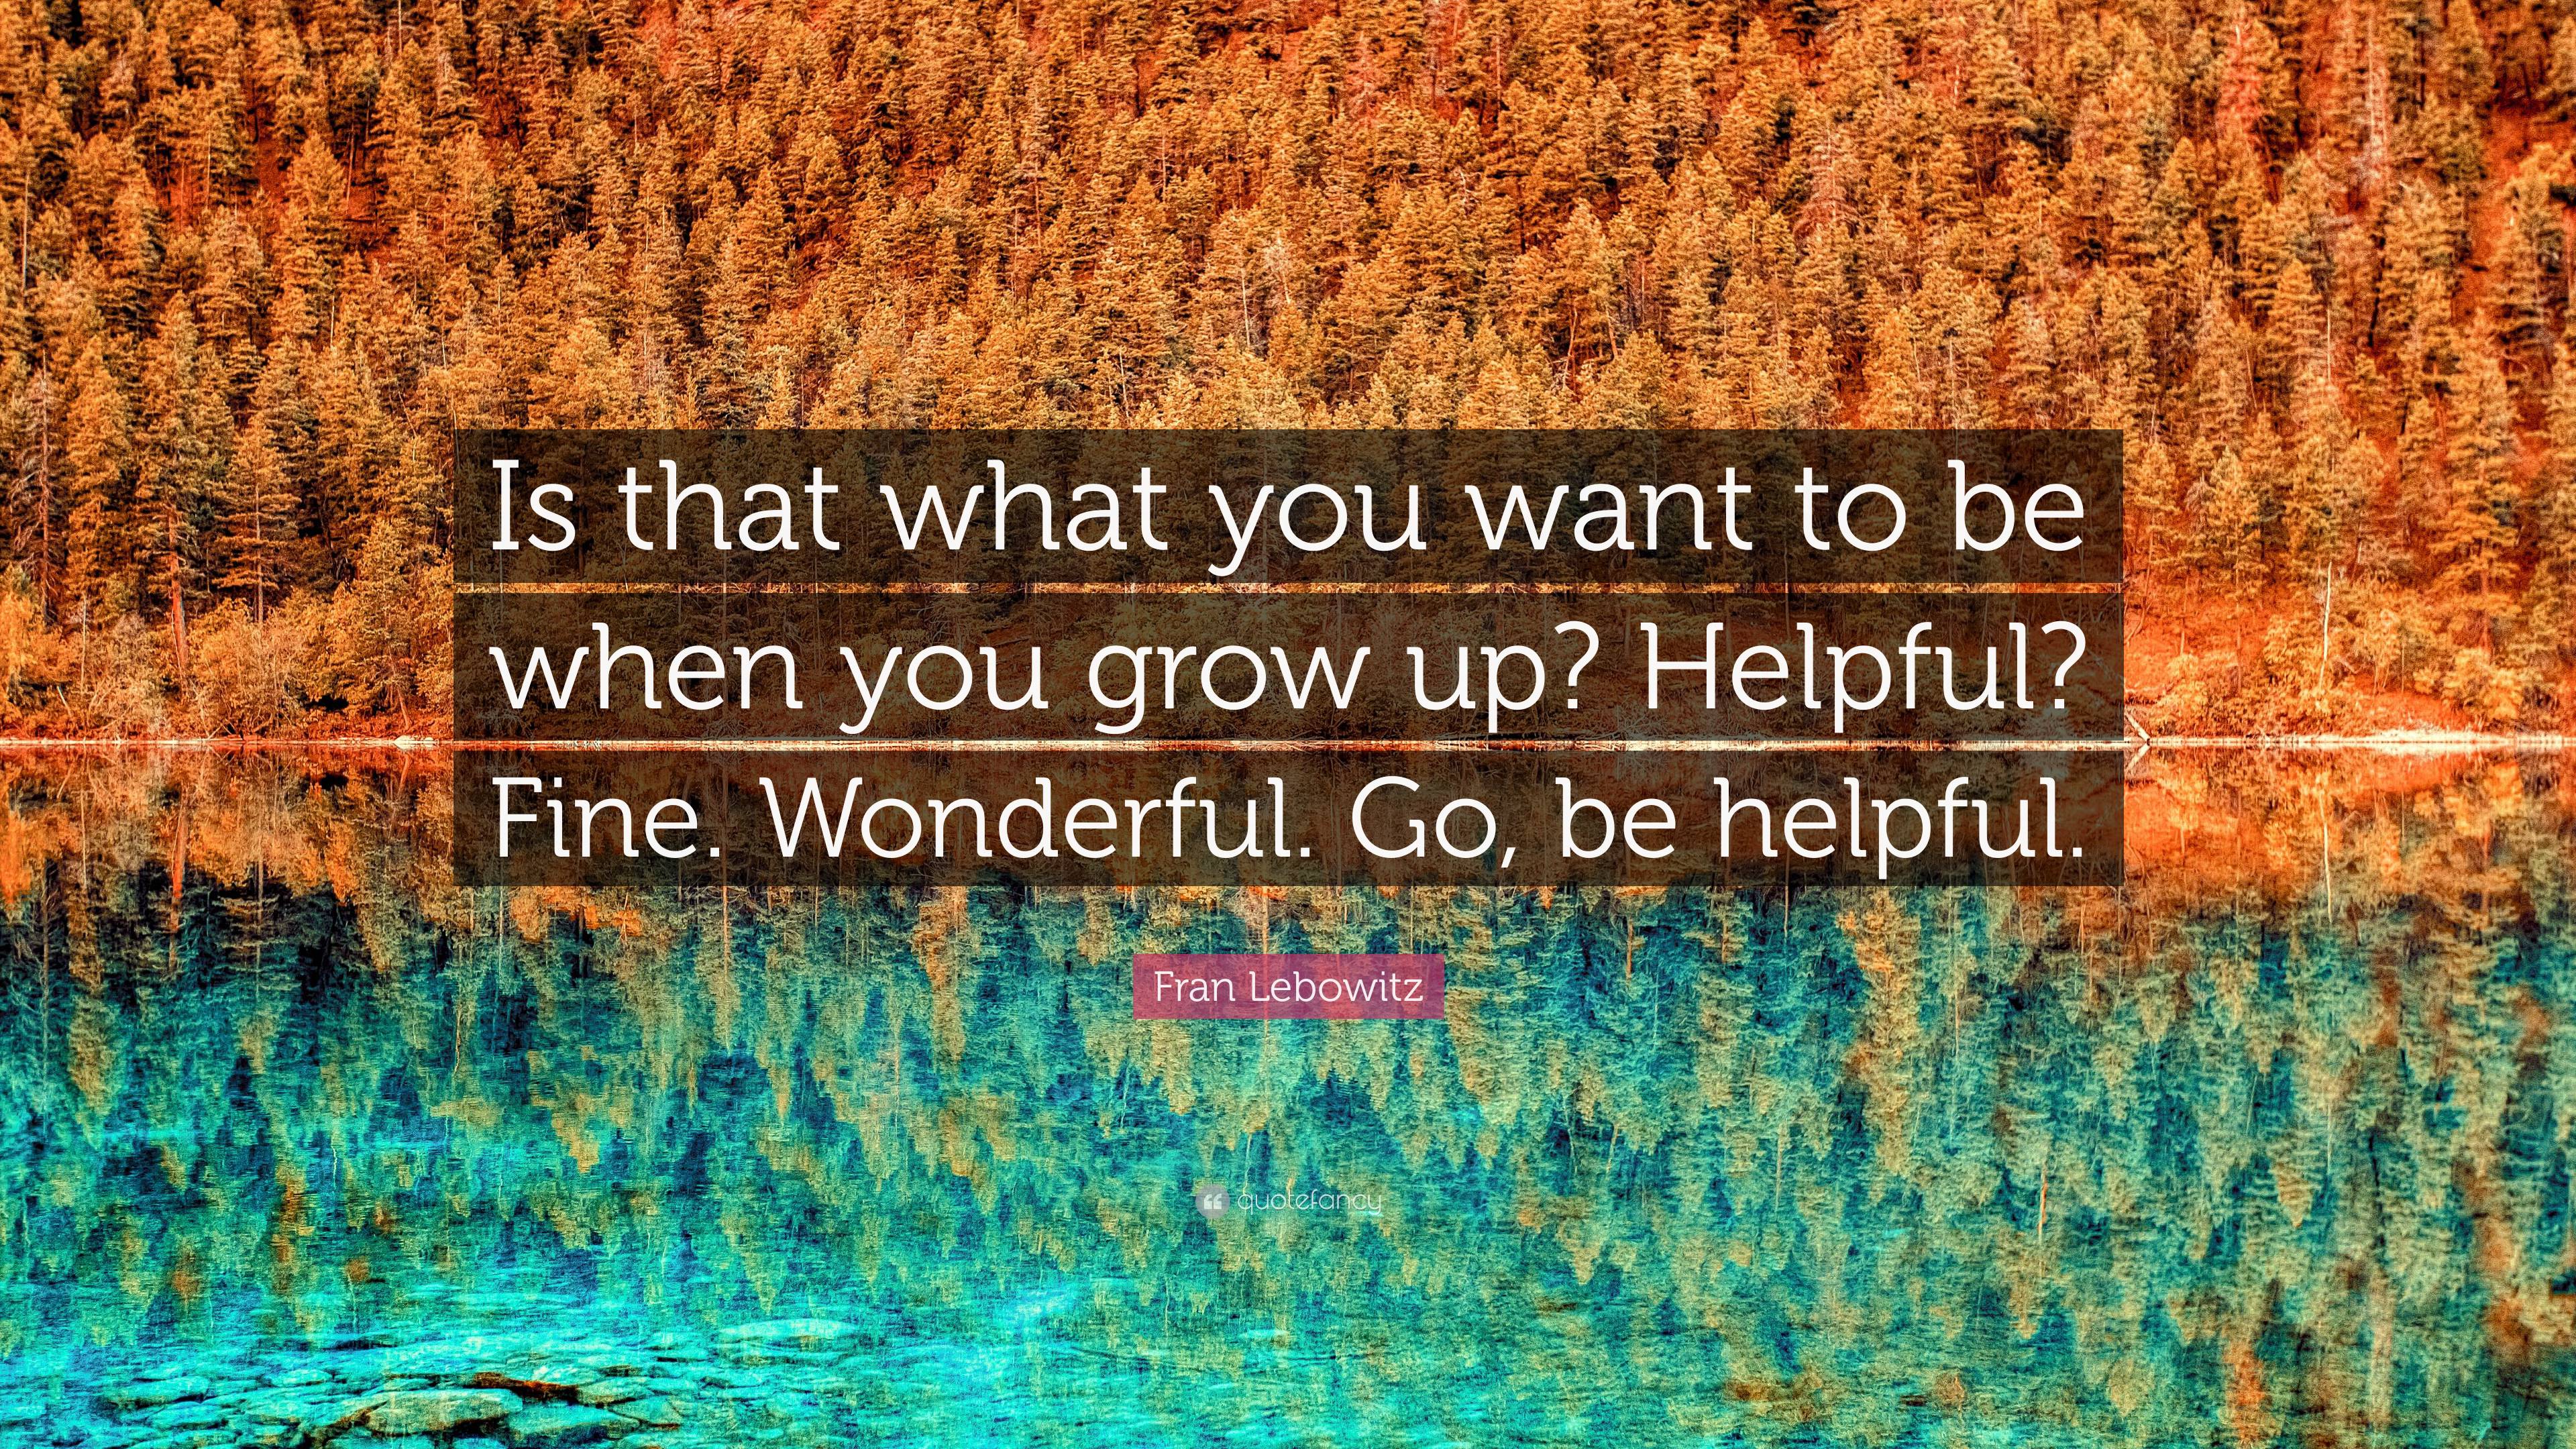 Who Do You Want To Be When You Grow Up?